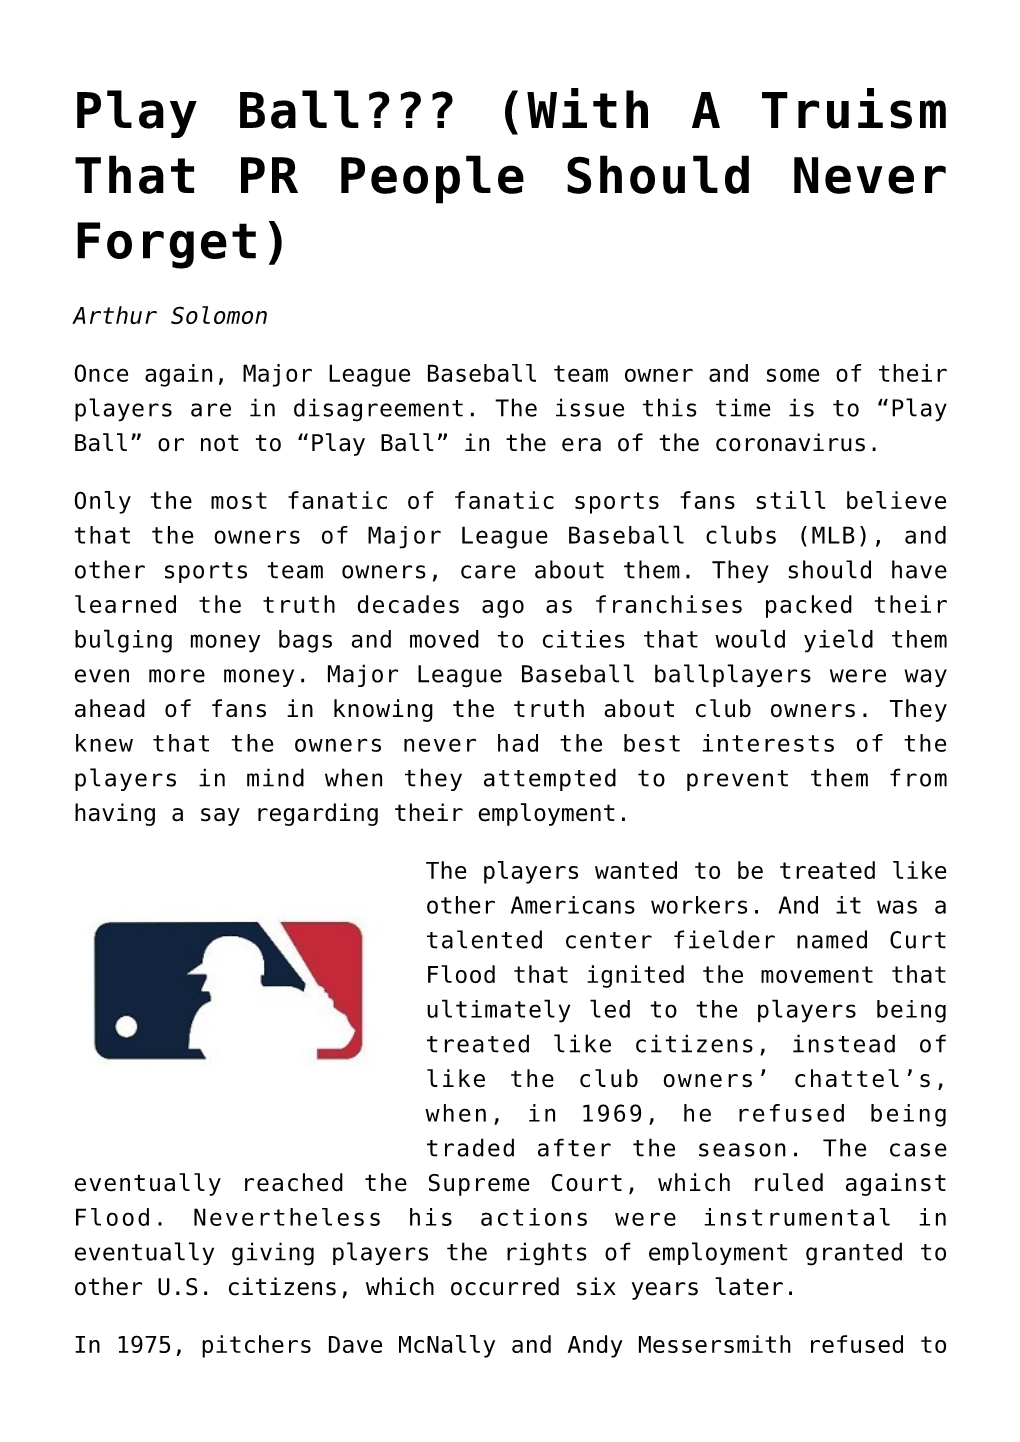 Play Ball??? (With a Truism That PR People Should Never Forget)